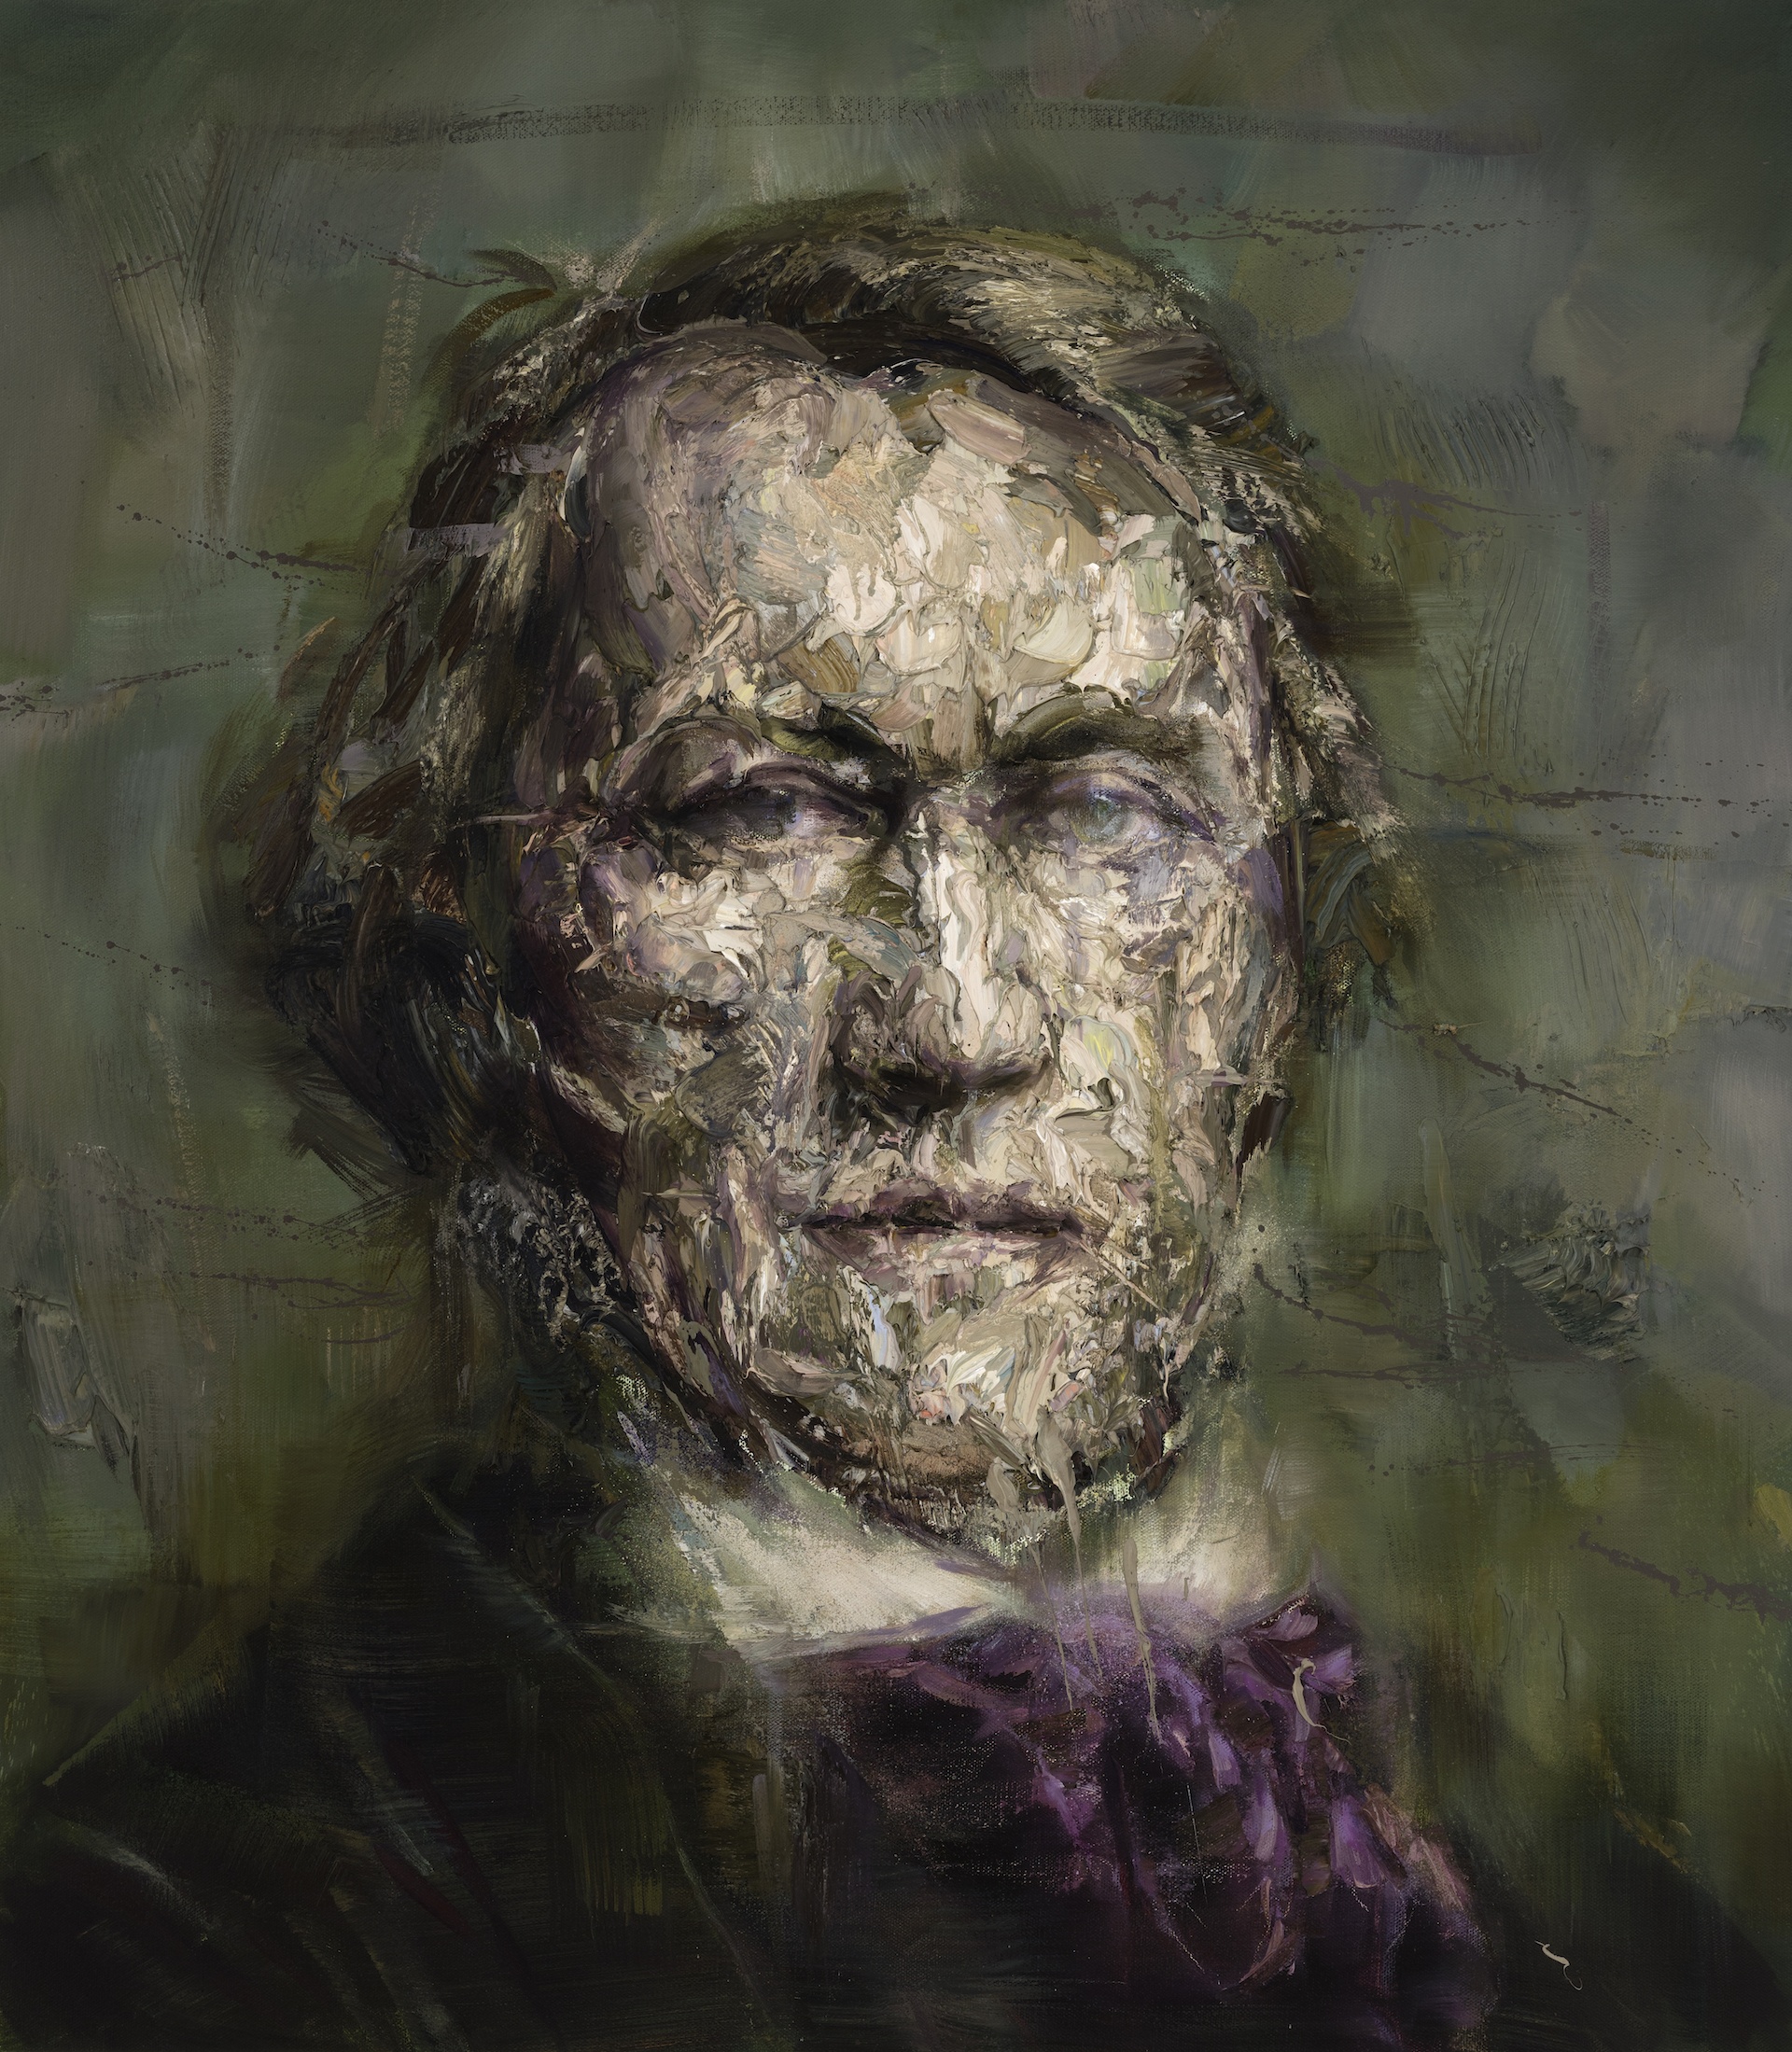 Richard Wagner, oil on linen, 48X42 inches, 2018, private collection, UK